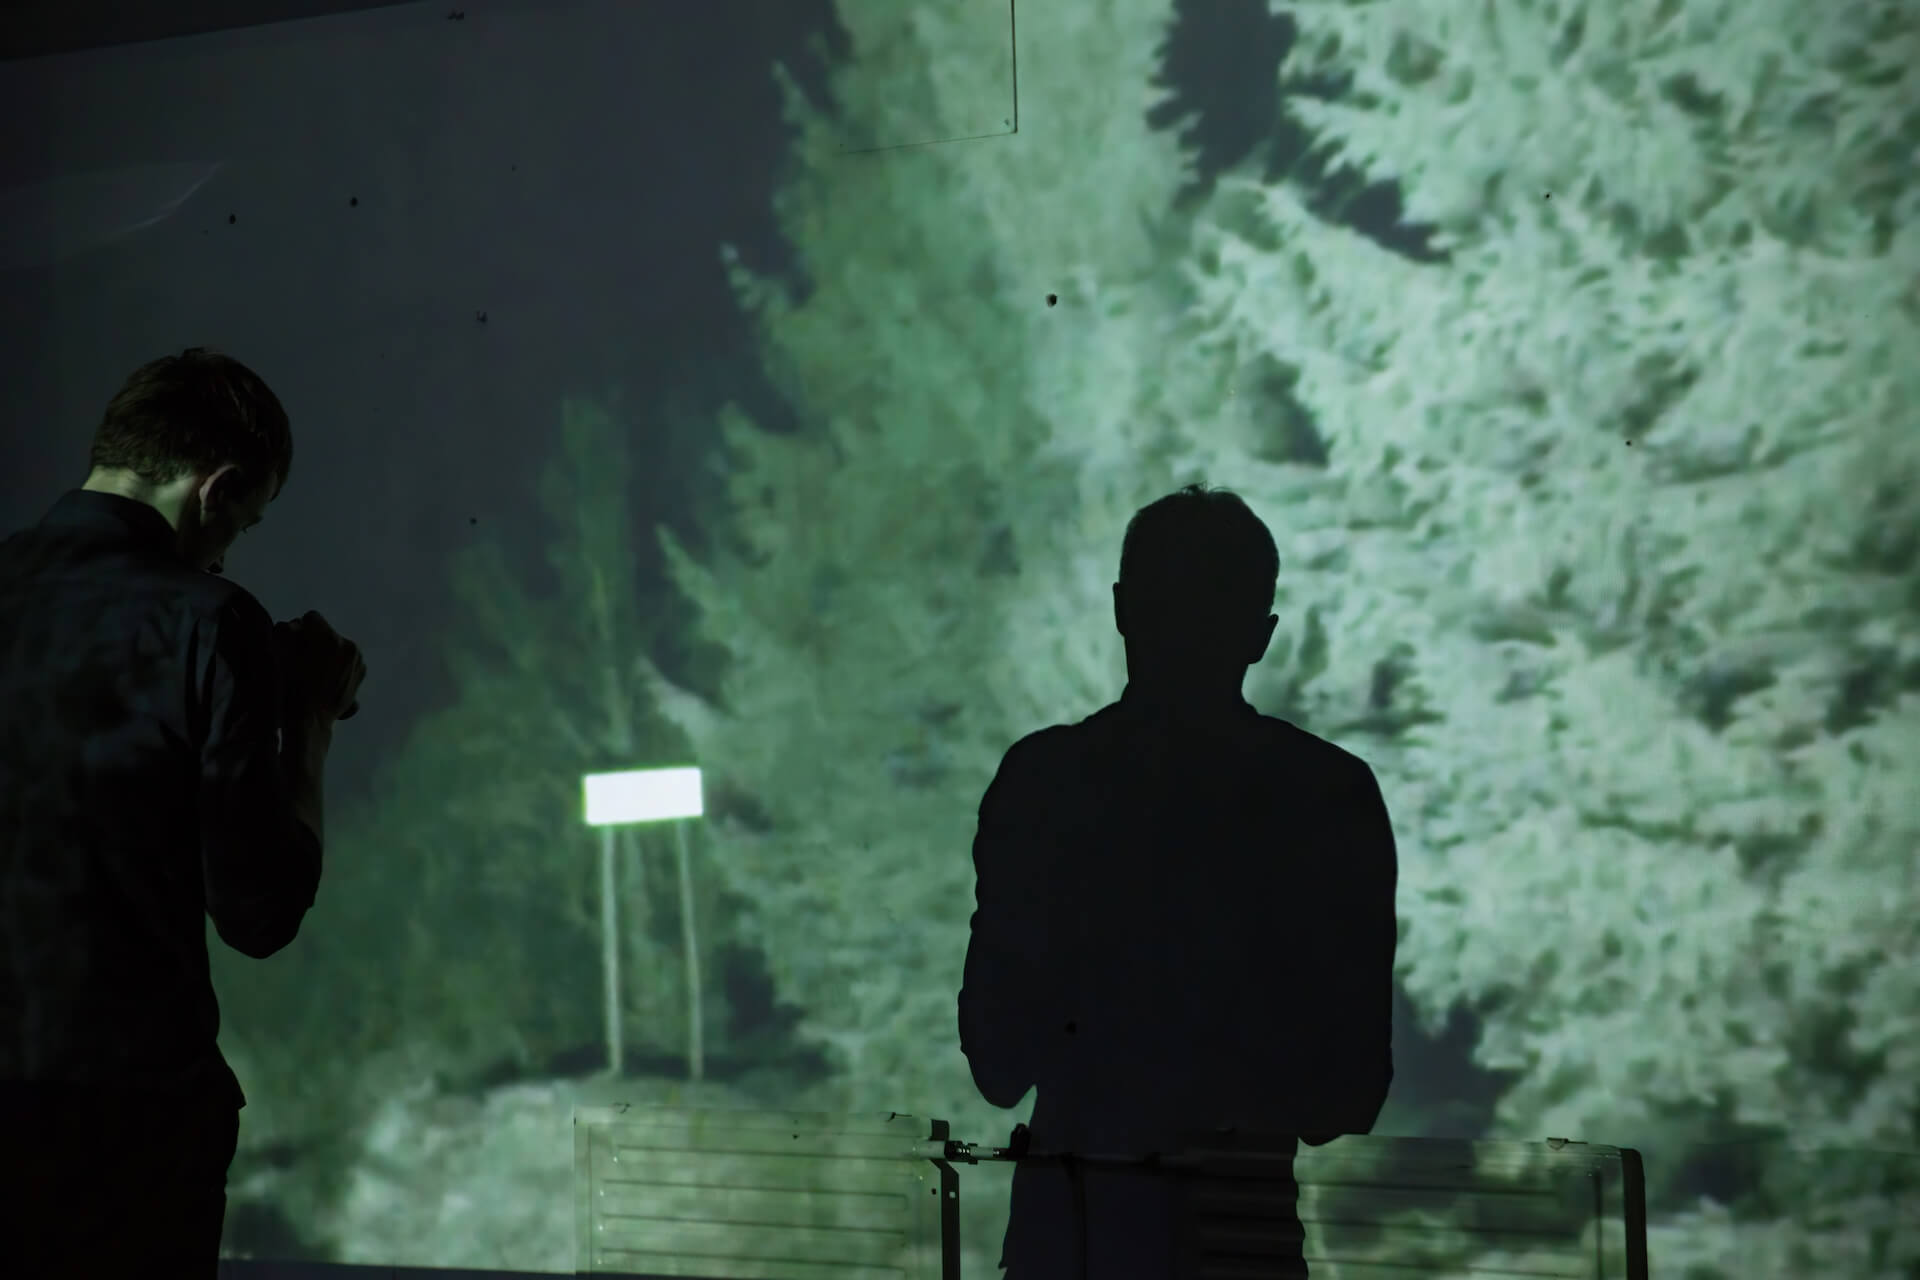 In the background, a picture of a dark forest is projected on the wall. In front of it stands two performers facing towards the wall. The room is so dark that there is only the silhouette of the two performers and the projected image on the wall.